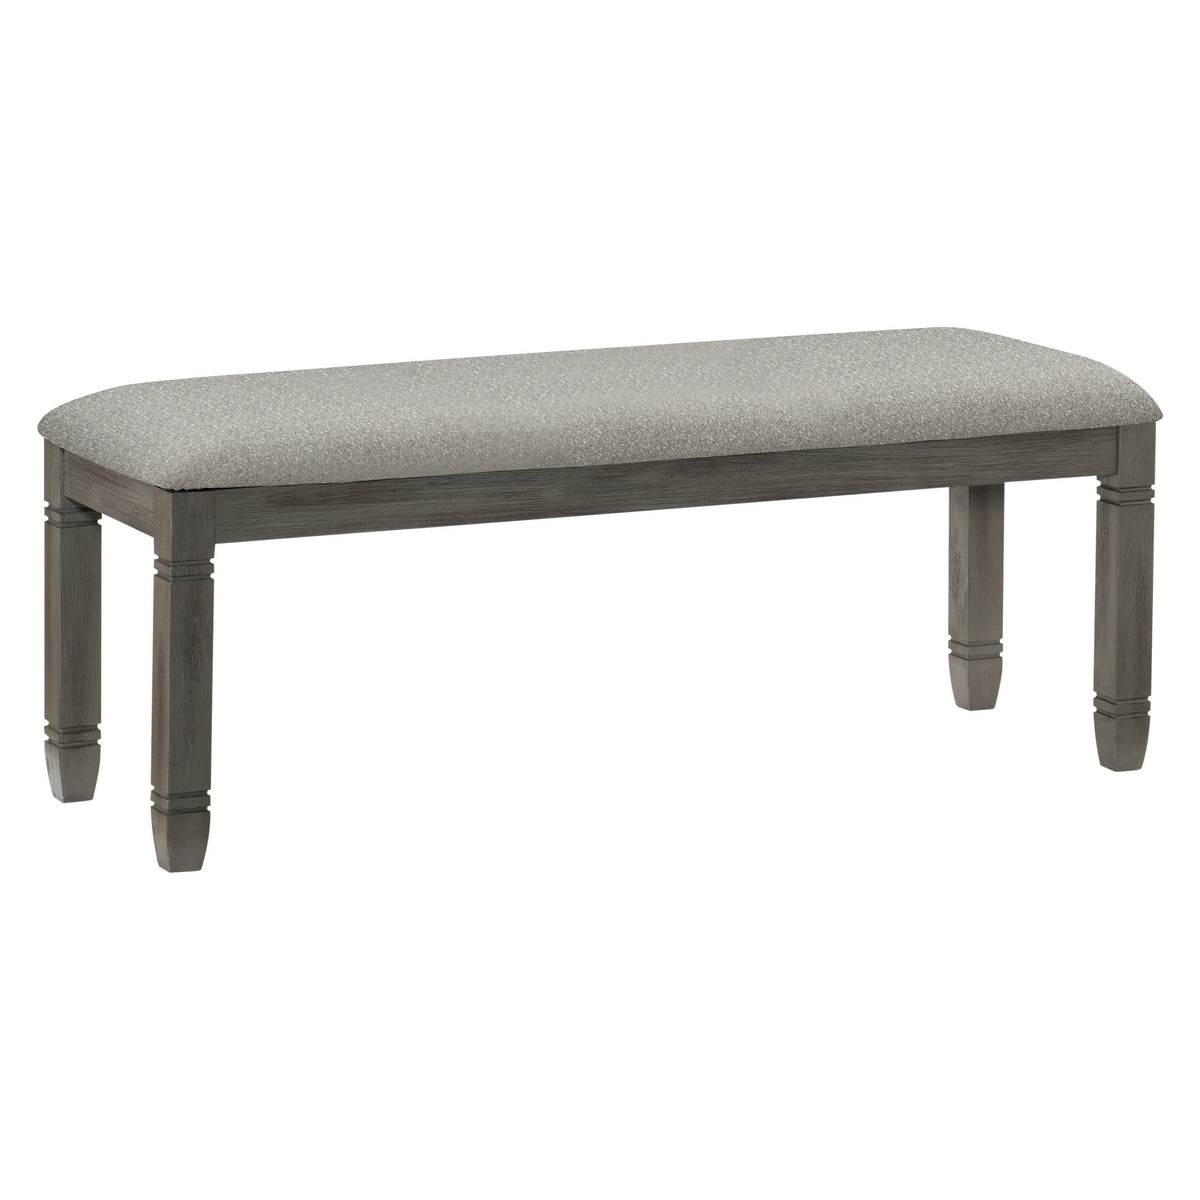 Wood Frame Dining Bench - Antique Gray Finish